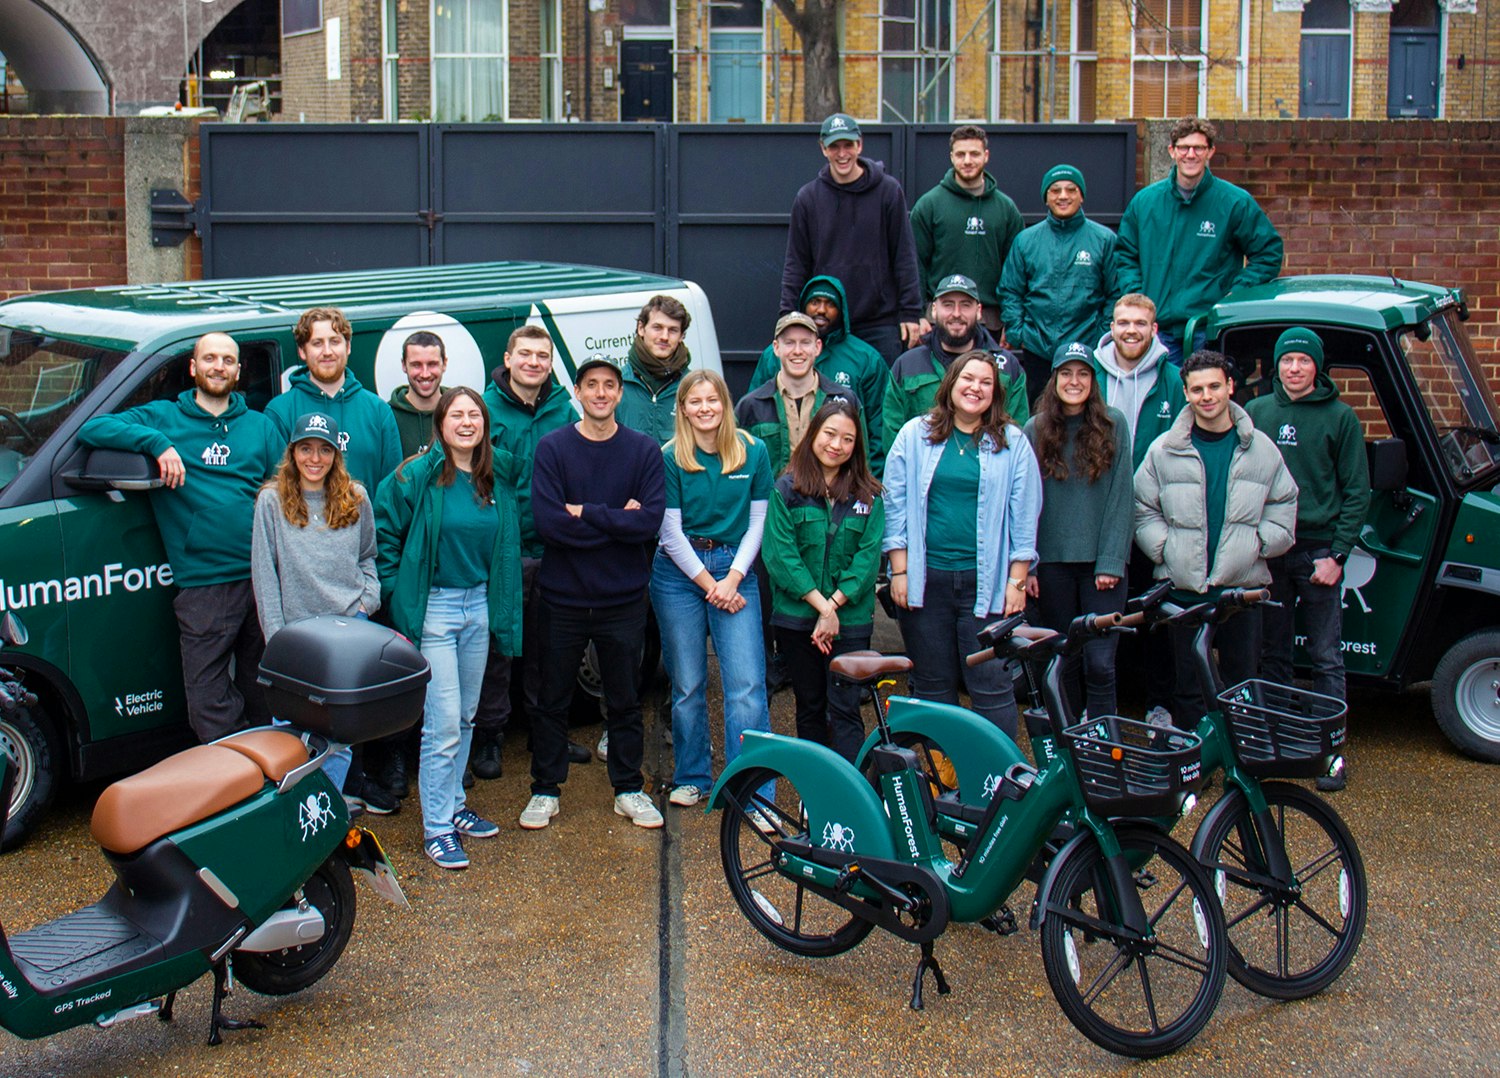 A team photo of HumanForest, some of which are wearing green jumpers